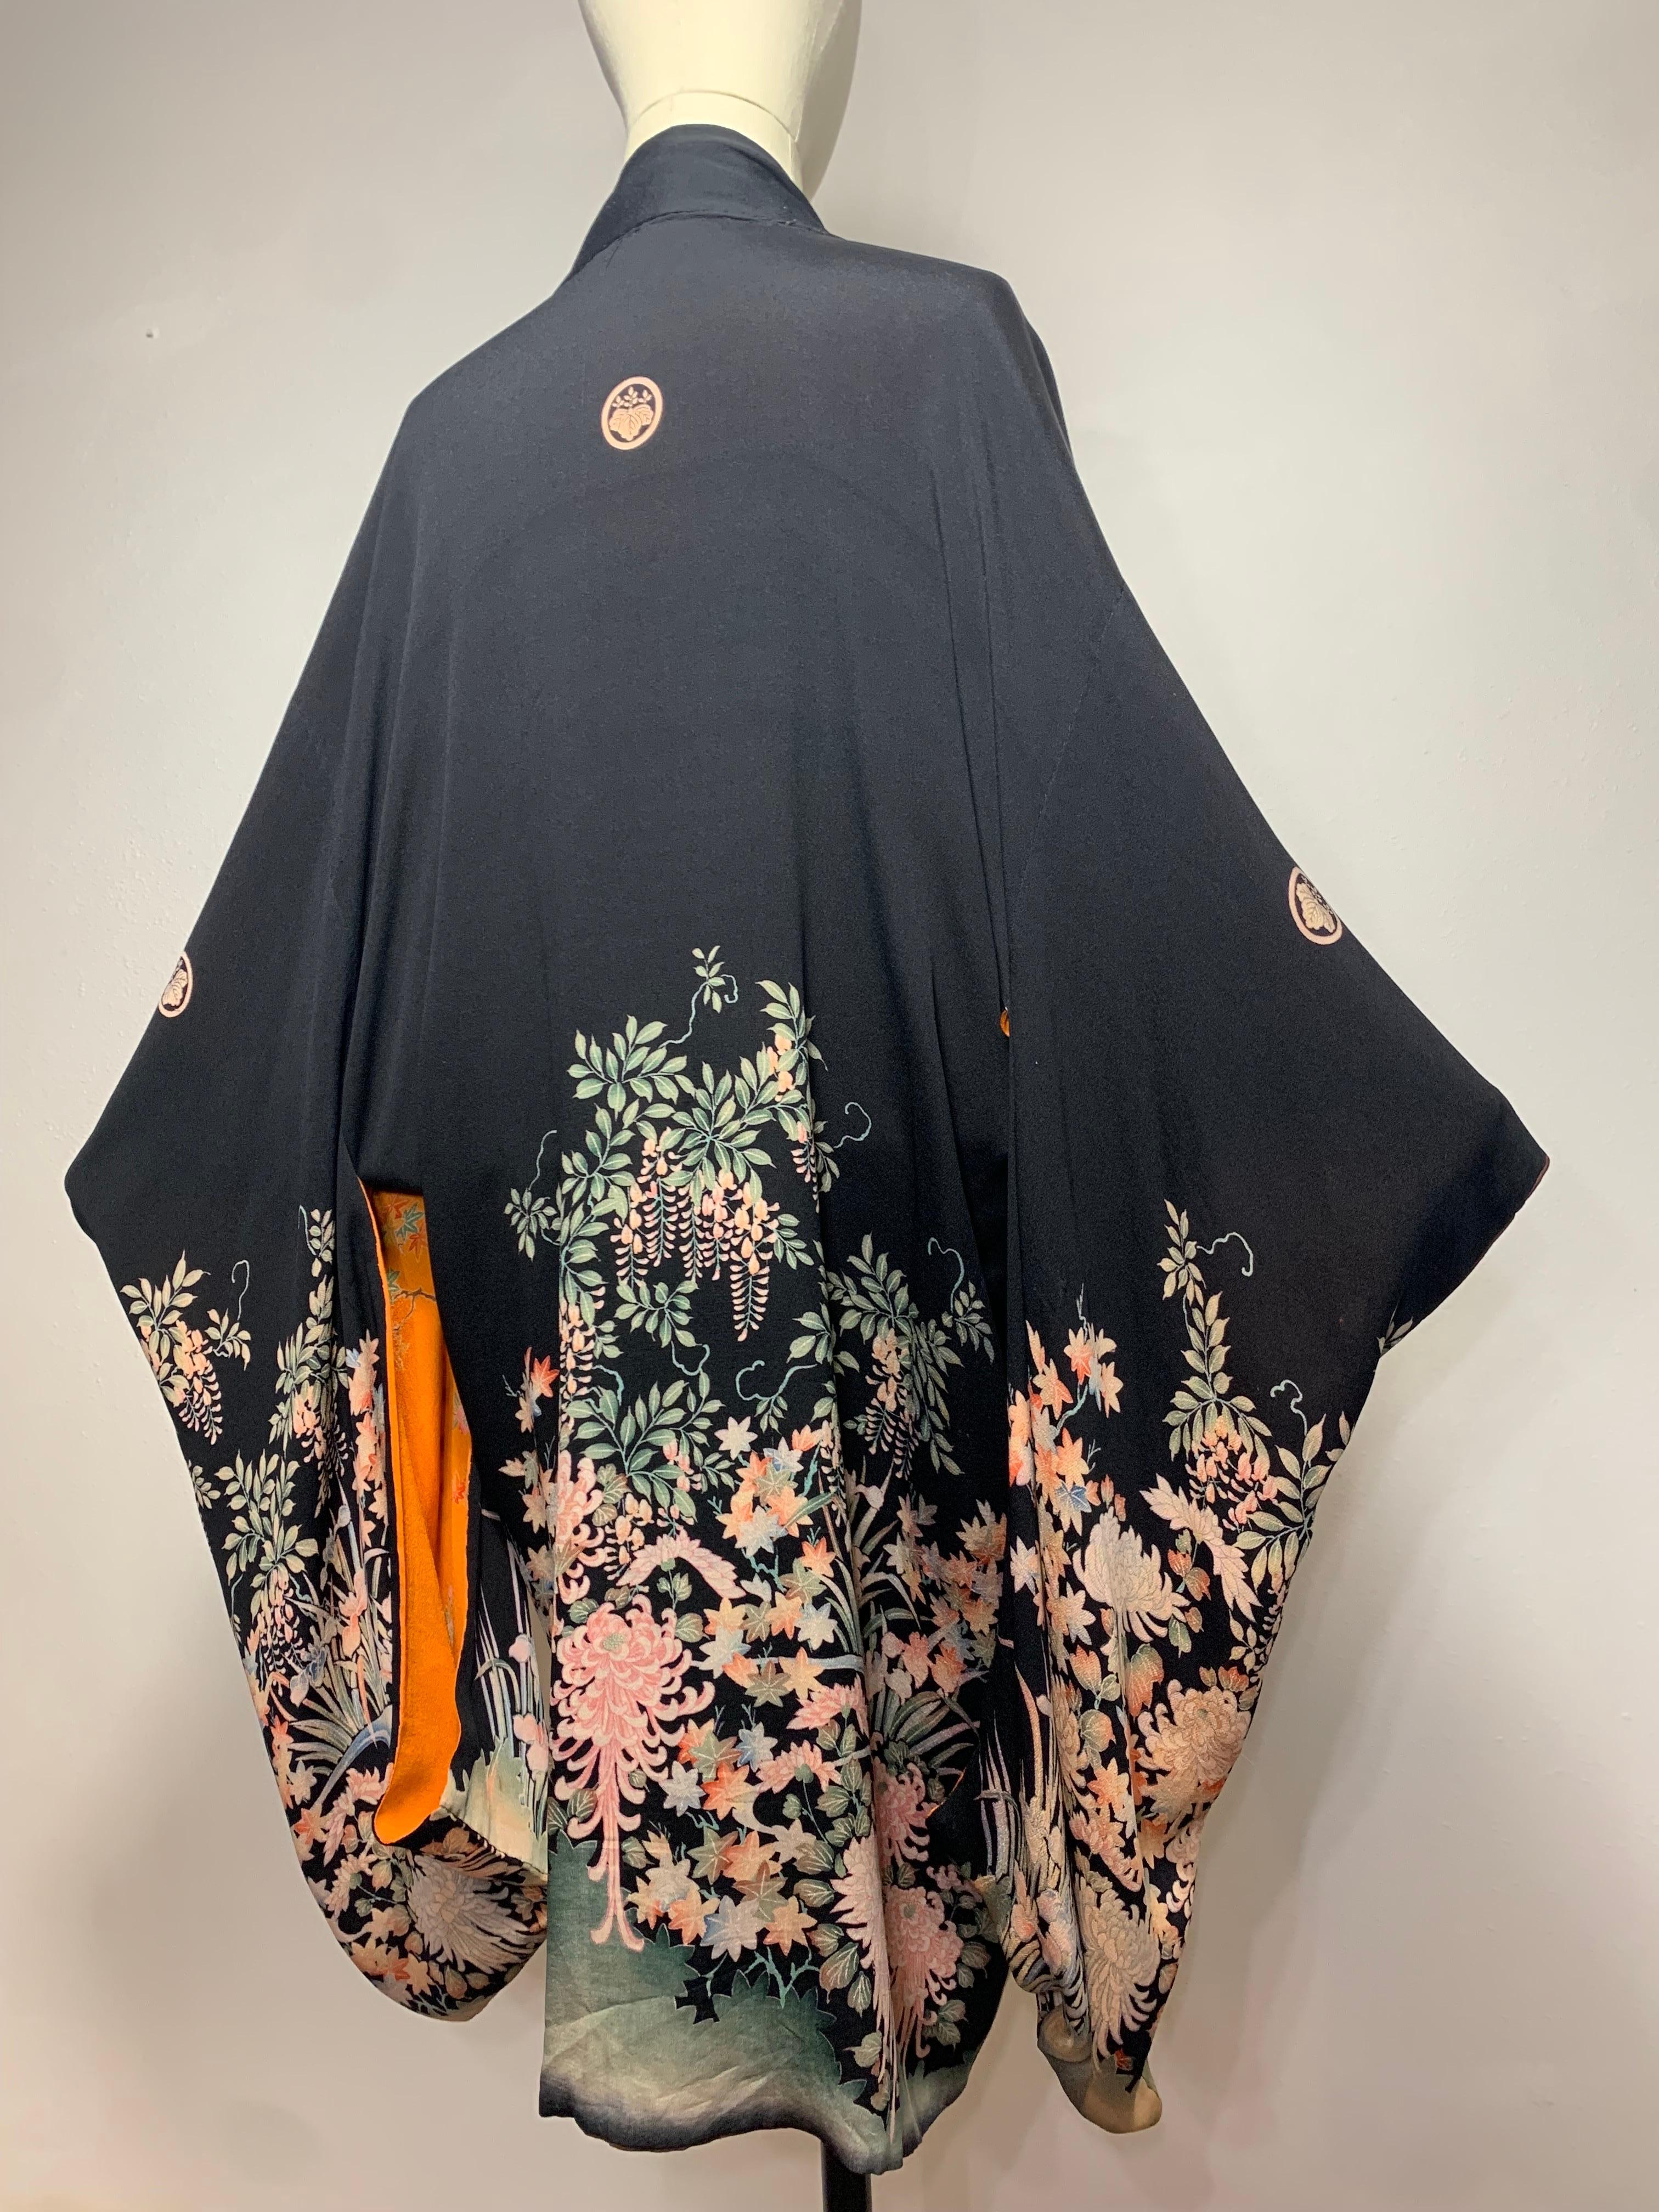 1930s Gorgeous Completely Reversible Silk Print Kimono in Marigold, Black and Chocolate Brown: This unusual and rare kimono is knee-length with equally stunning patterns on either side. One side is black with wisteria and chrysanthemum print at hem.